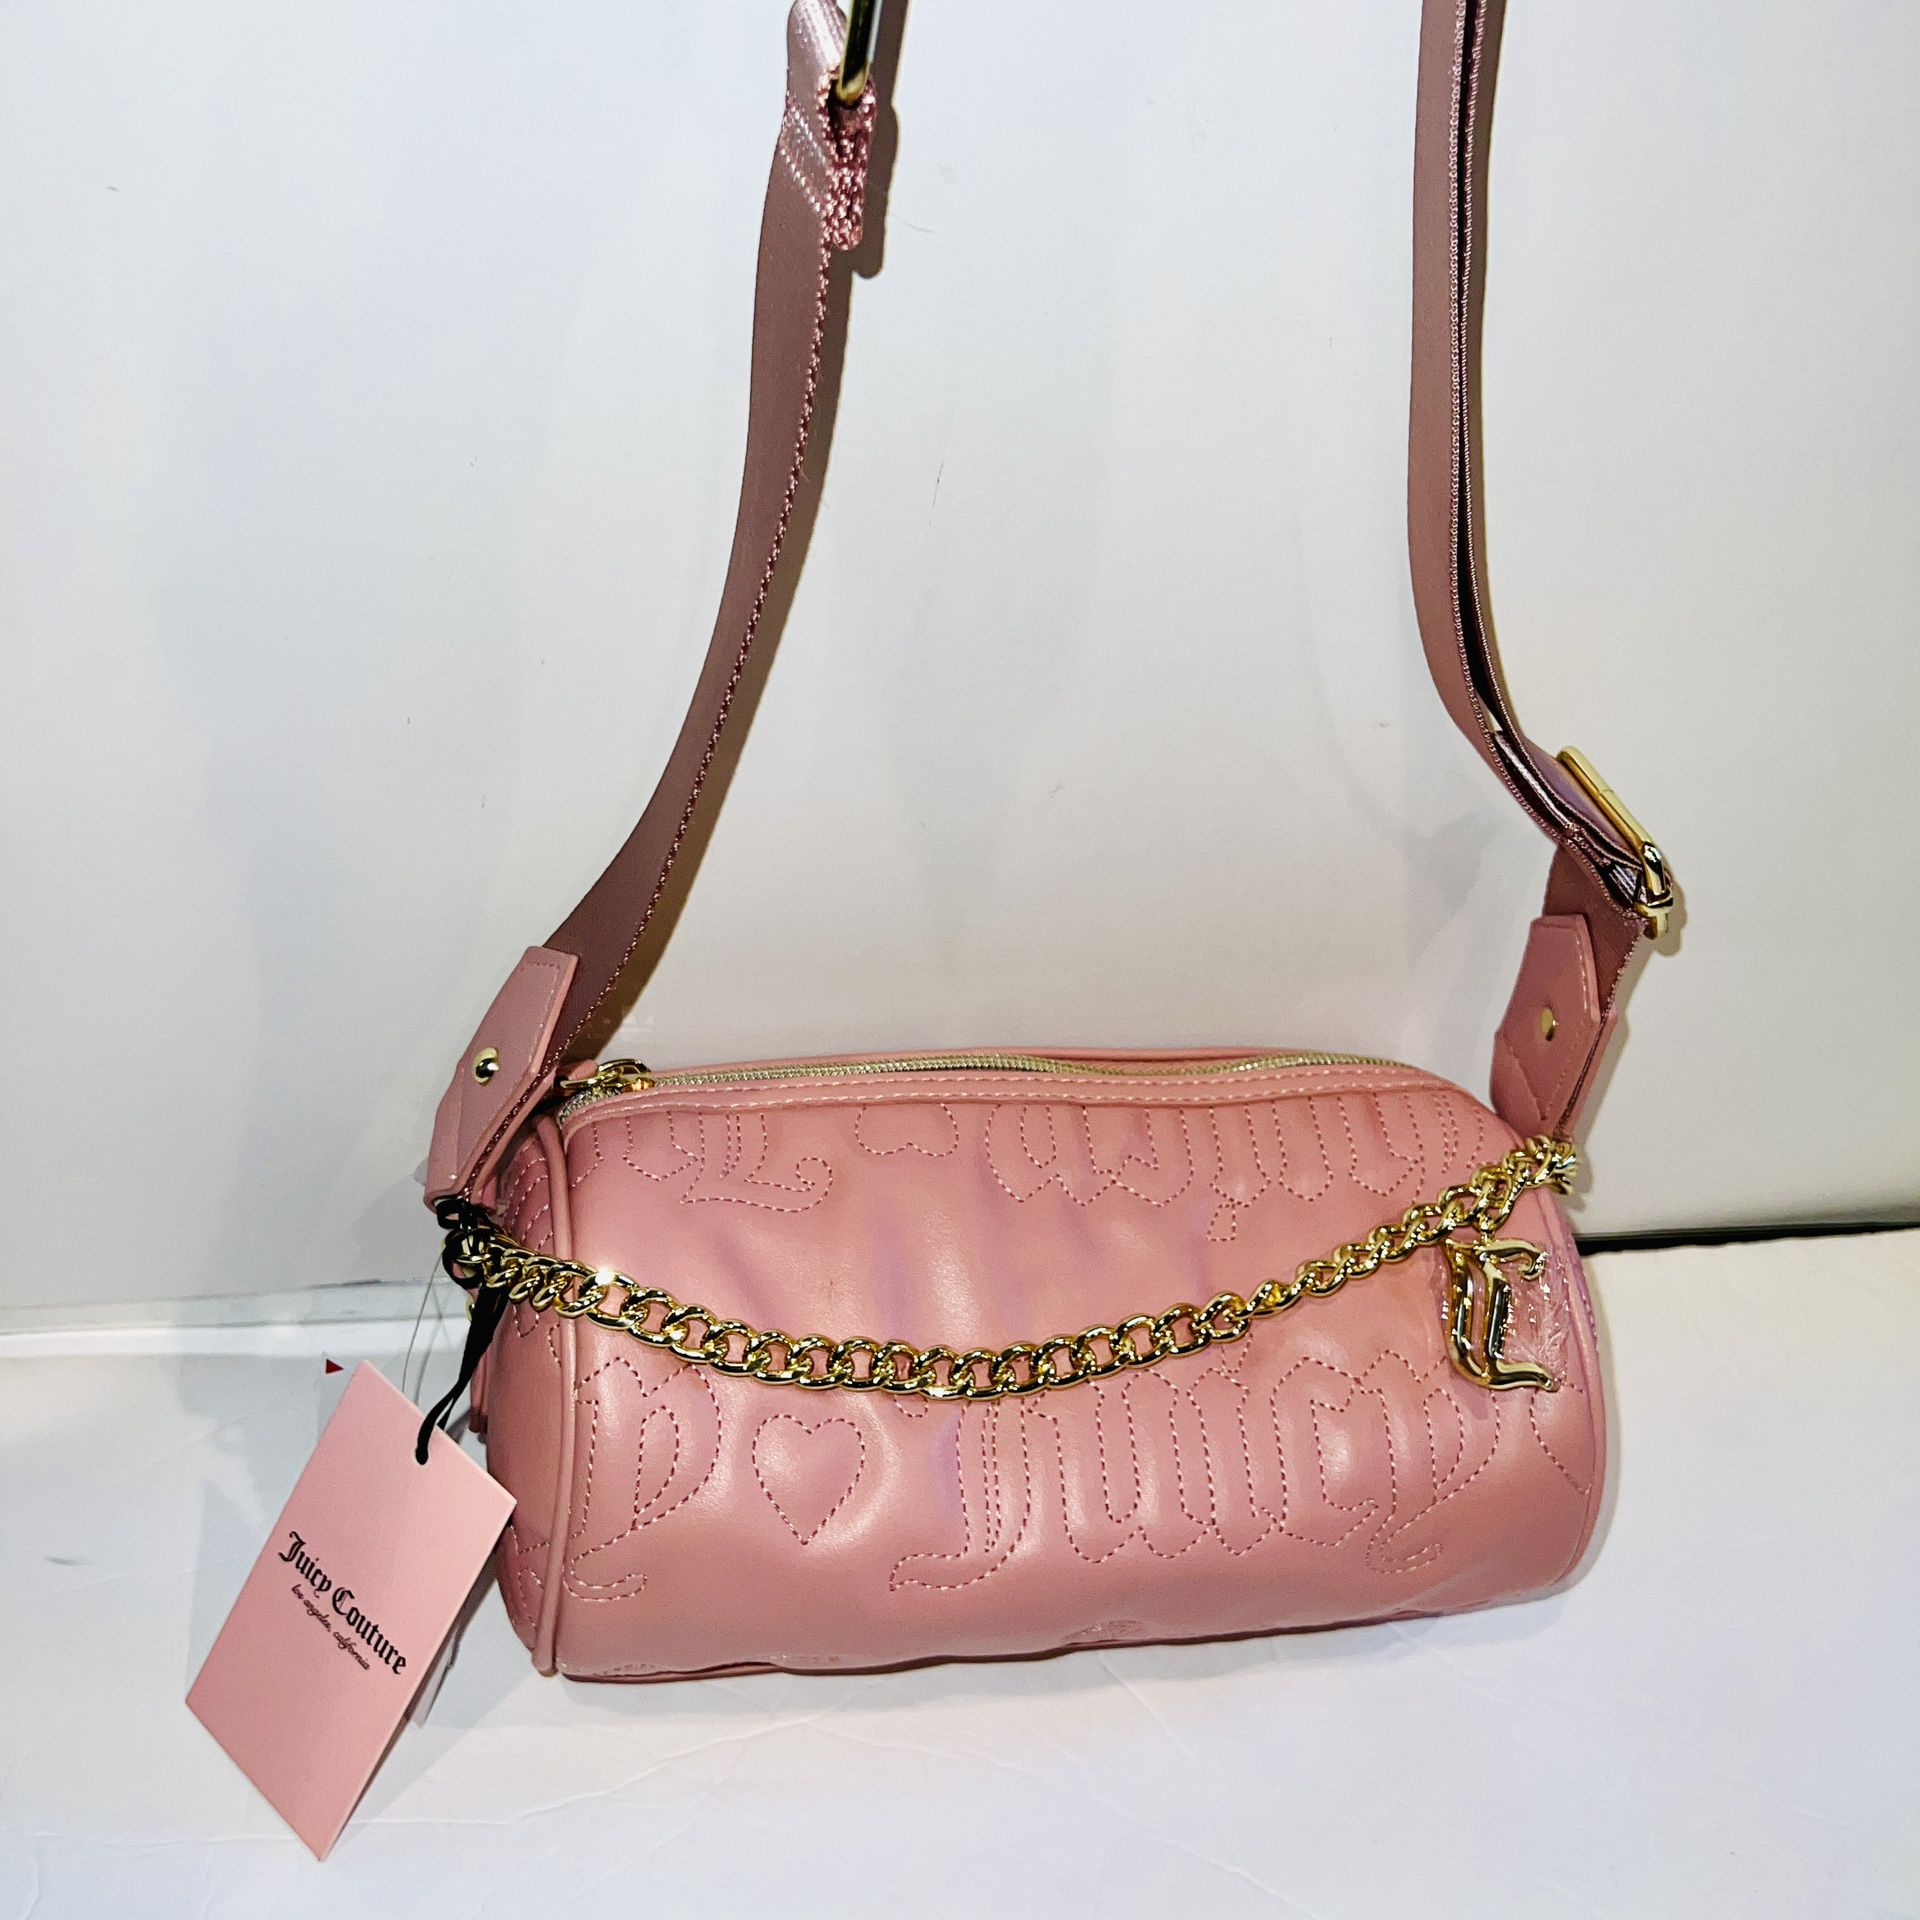 New Pink Juicy Couture Purse Barrel Bag Quilted Taffy Puff Roll Crossbody